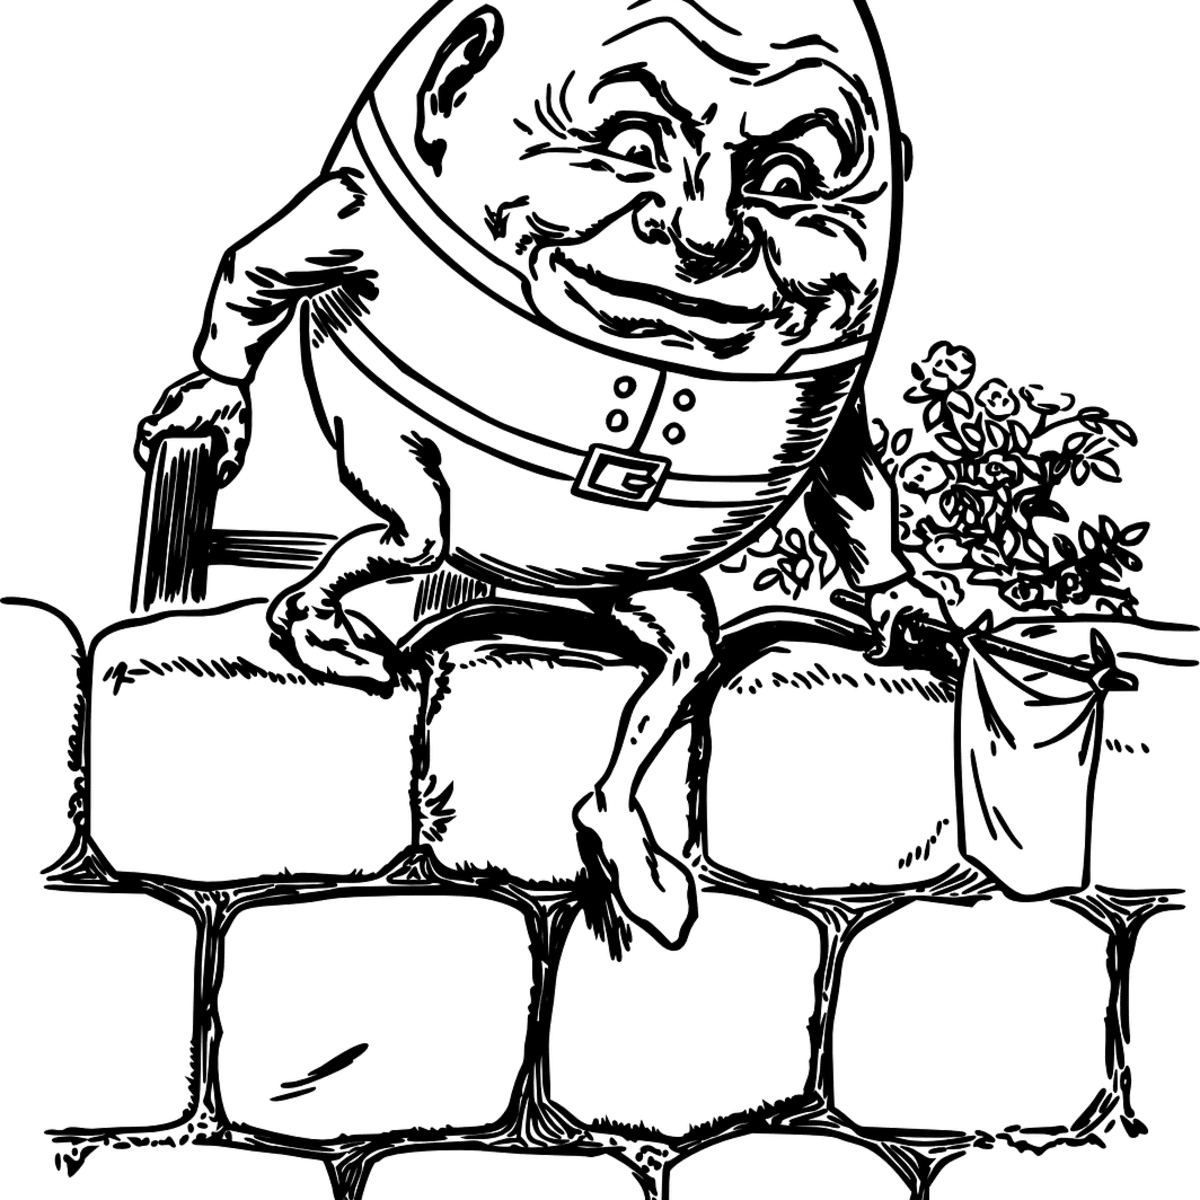 Outlined happy humpty dumpty egg Royalty Free Vector Image